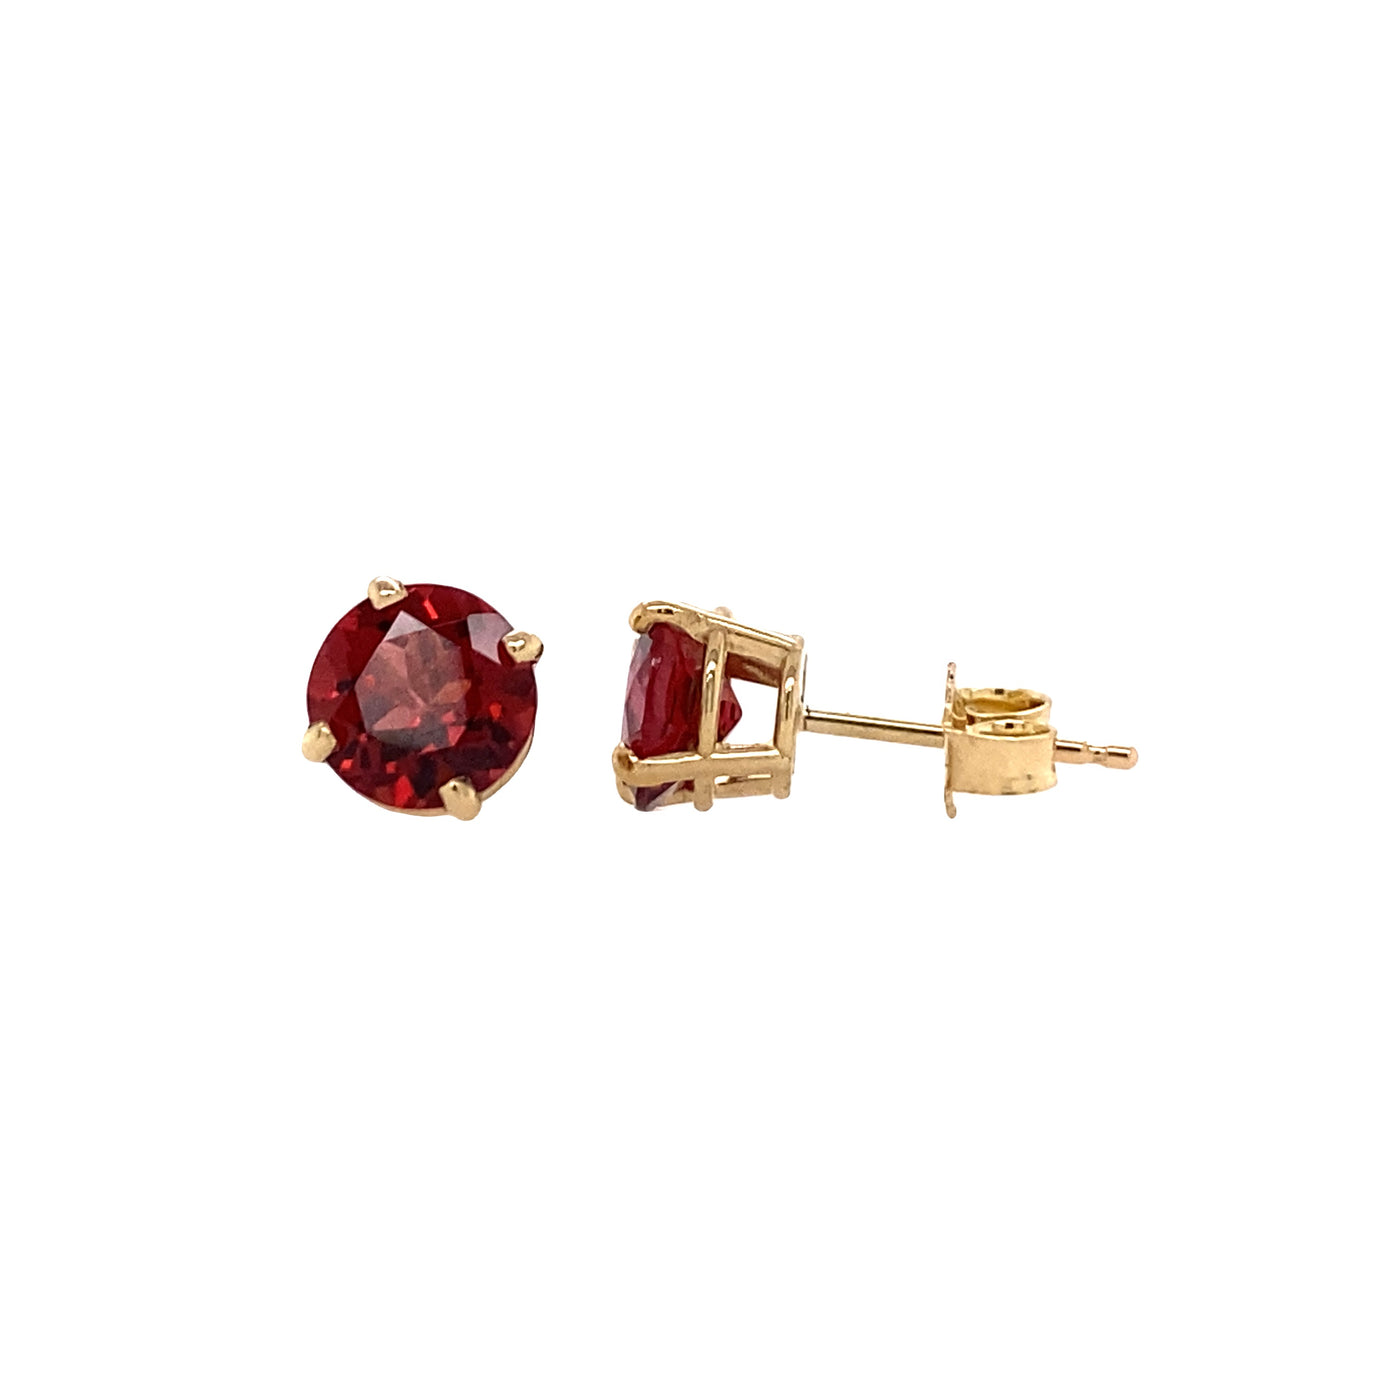 Beeghly & Co. 14 KT Yellow Gold  Garnet Stud Earrings BCE-AS-6GN